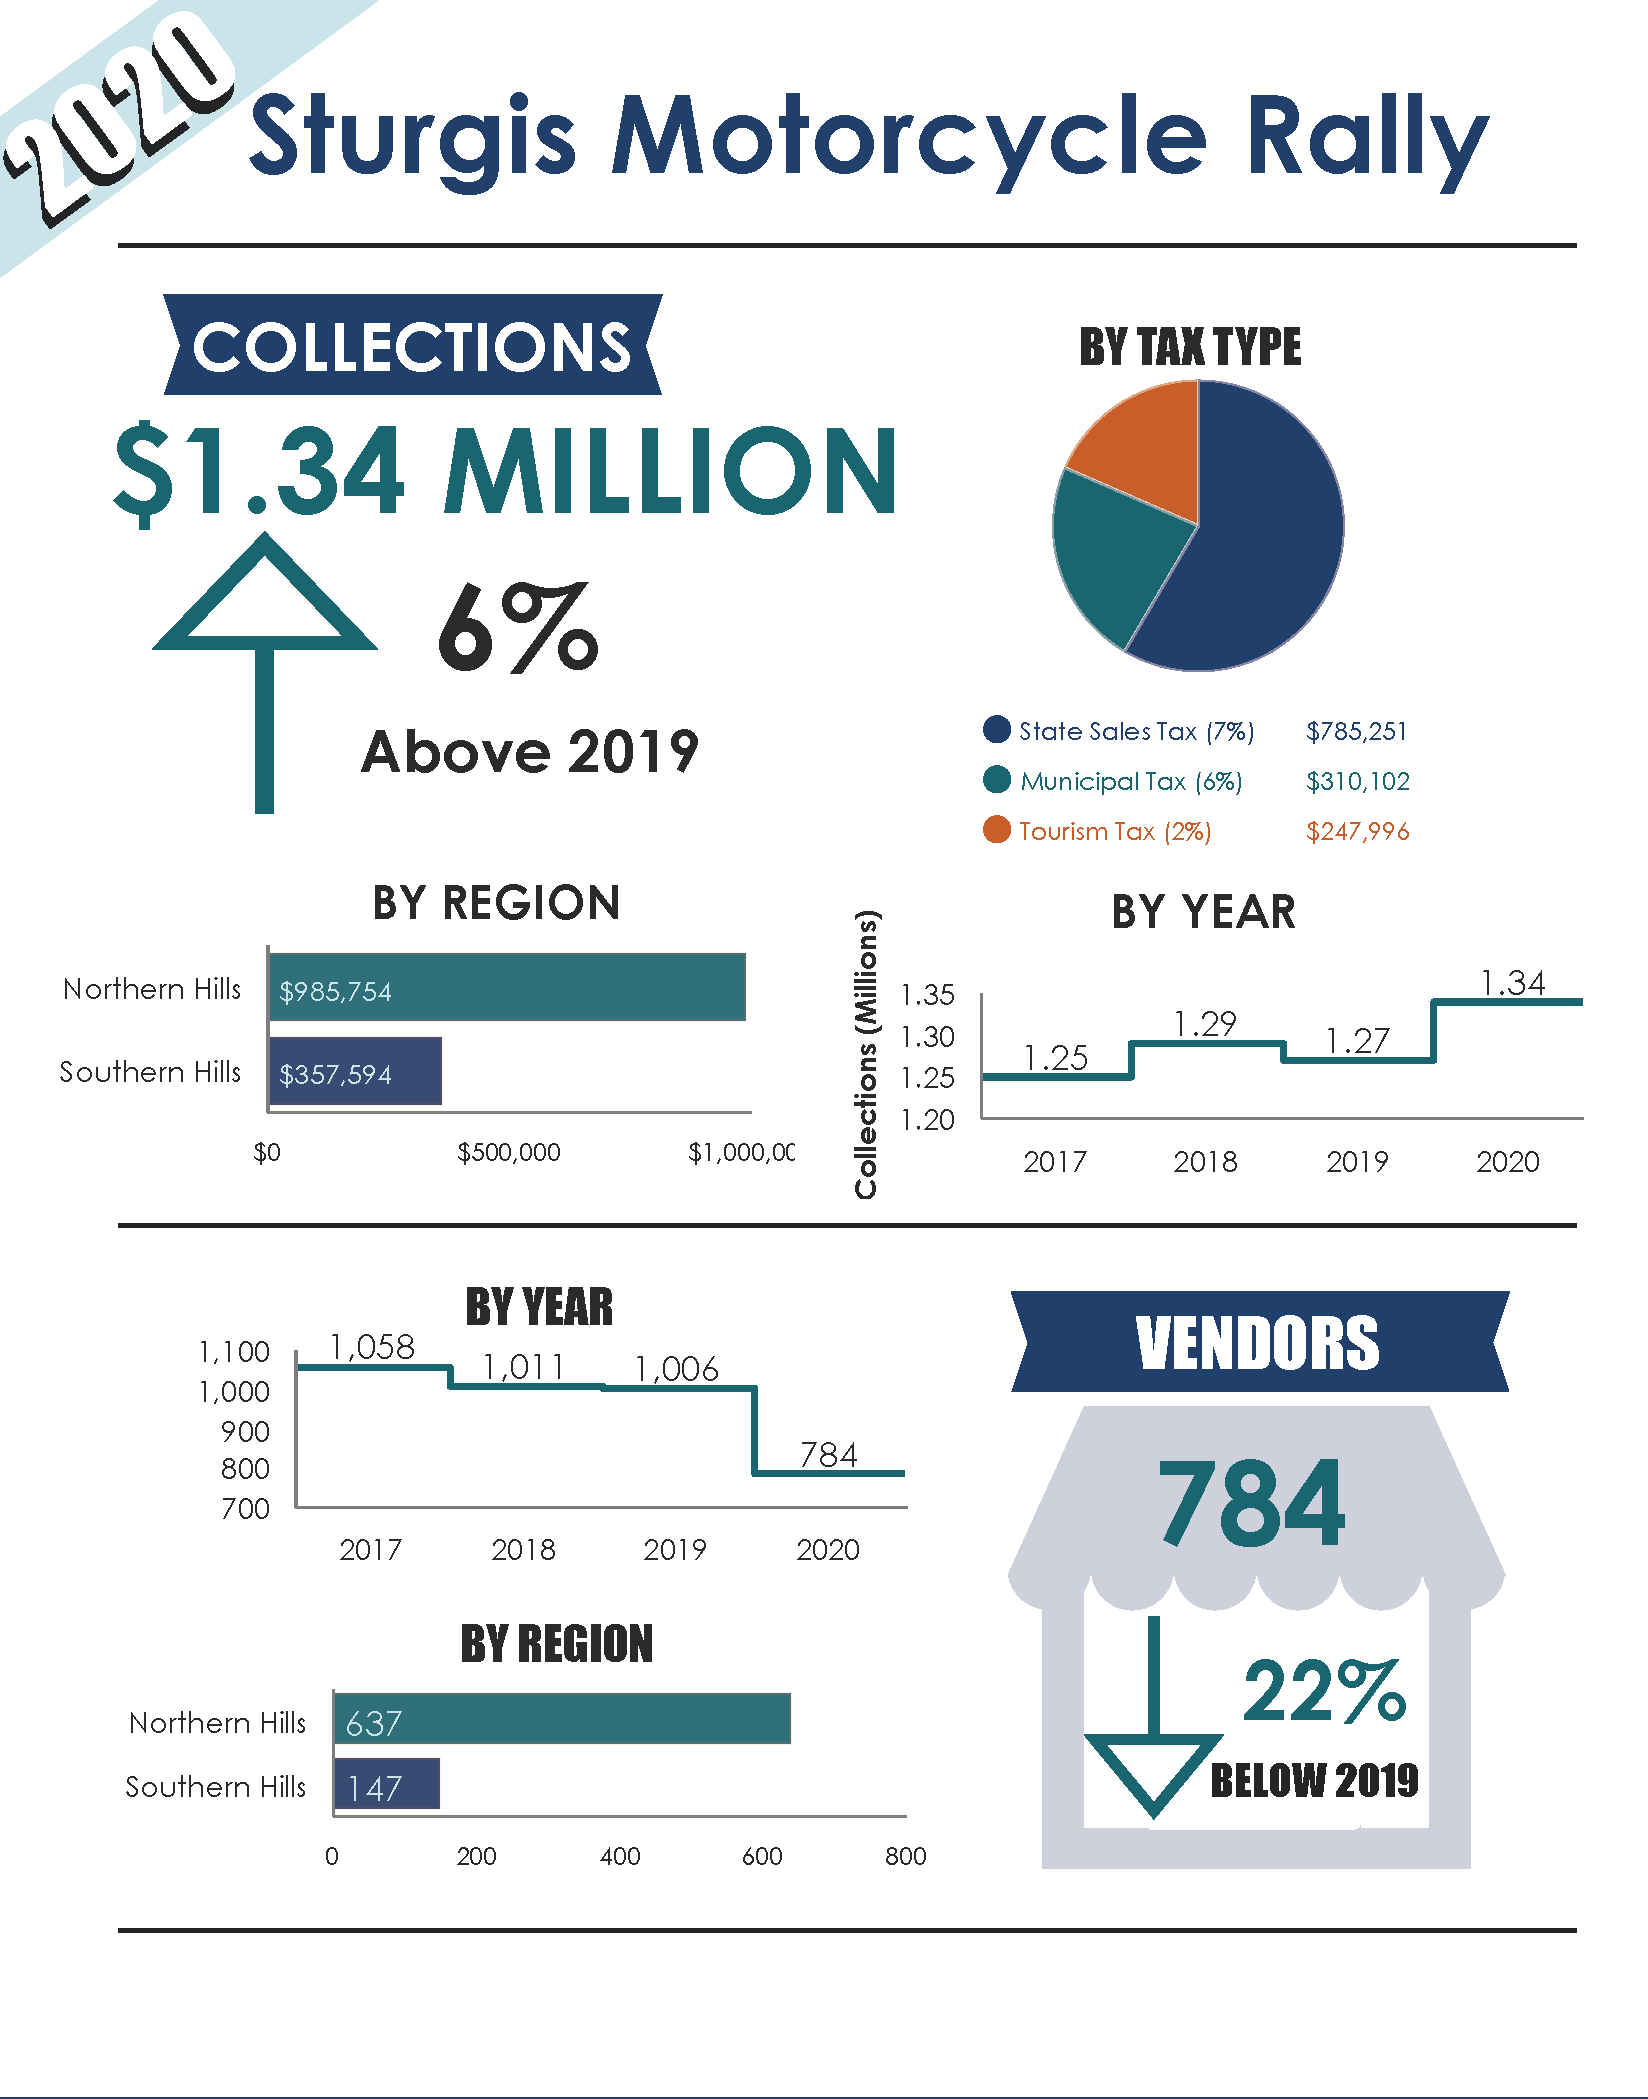 South Dakota Sturgis Rally Motorcycle infographic, with tax collections, tax types, and vendor numbers